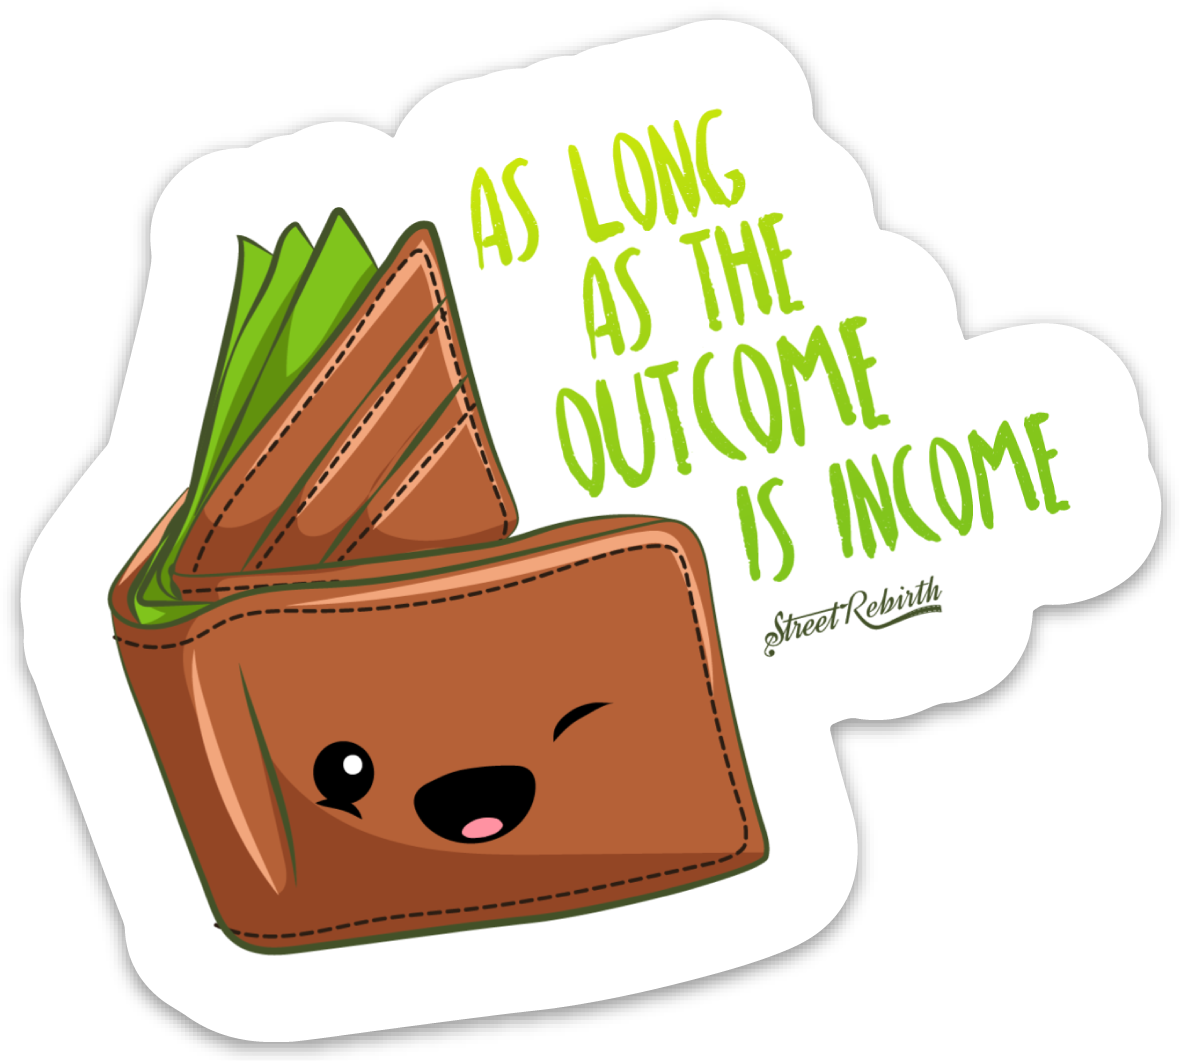 AS LONG AS THE OUTCOME IS INCOME PUN STICKER – ONE 4 INCH WATER PROOF VINYL STICKER – FOR HYDRO FLASK, SKATEBOARD, LAPTOP, PLANNER, CAR, COLLECTING, GIFTING